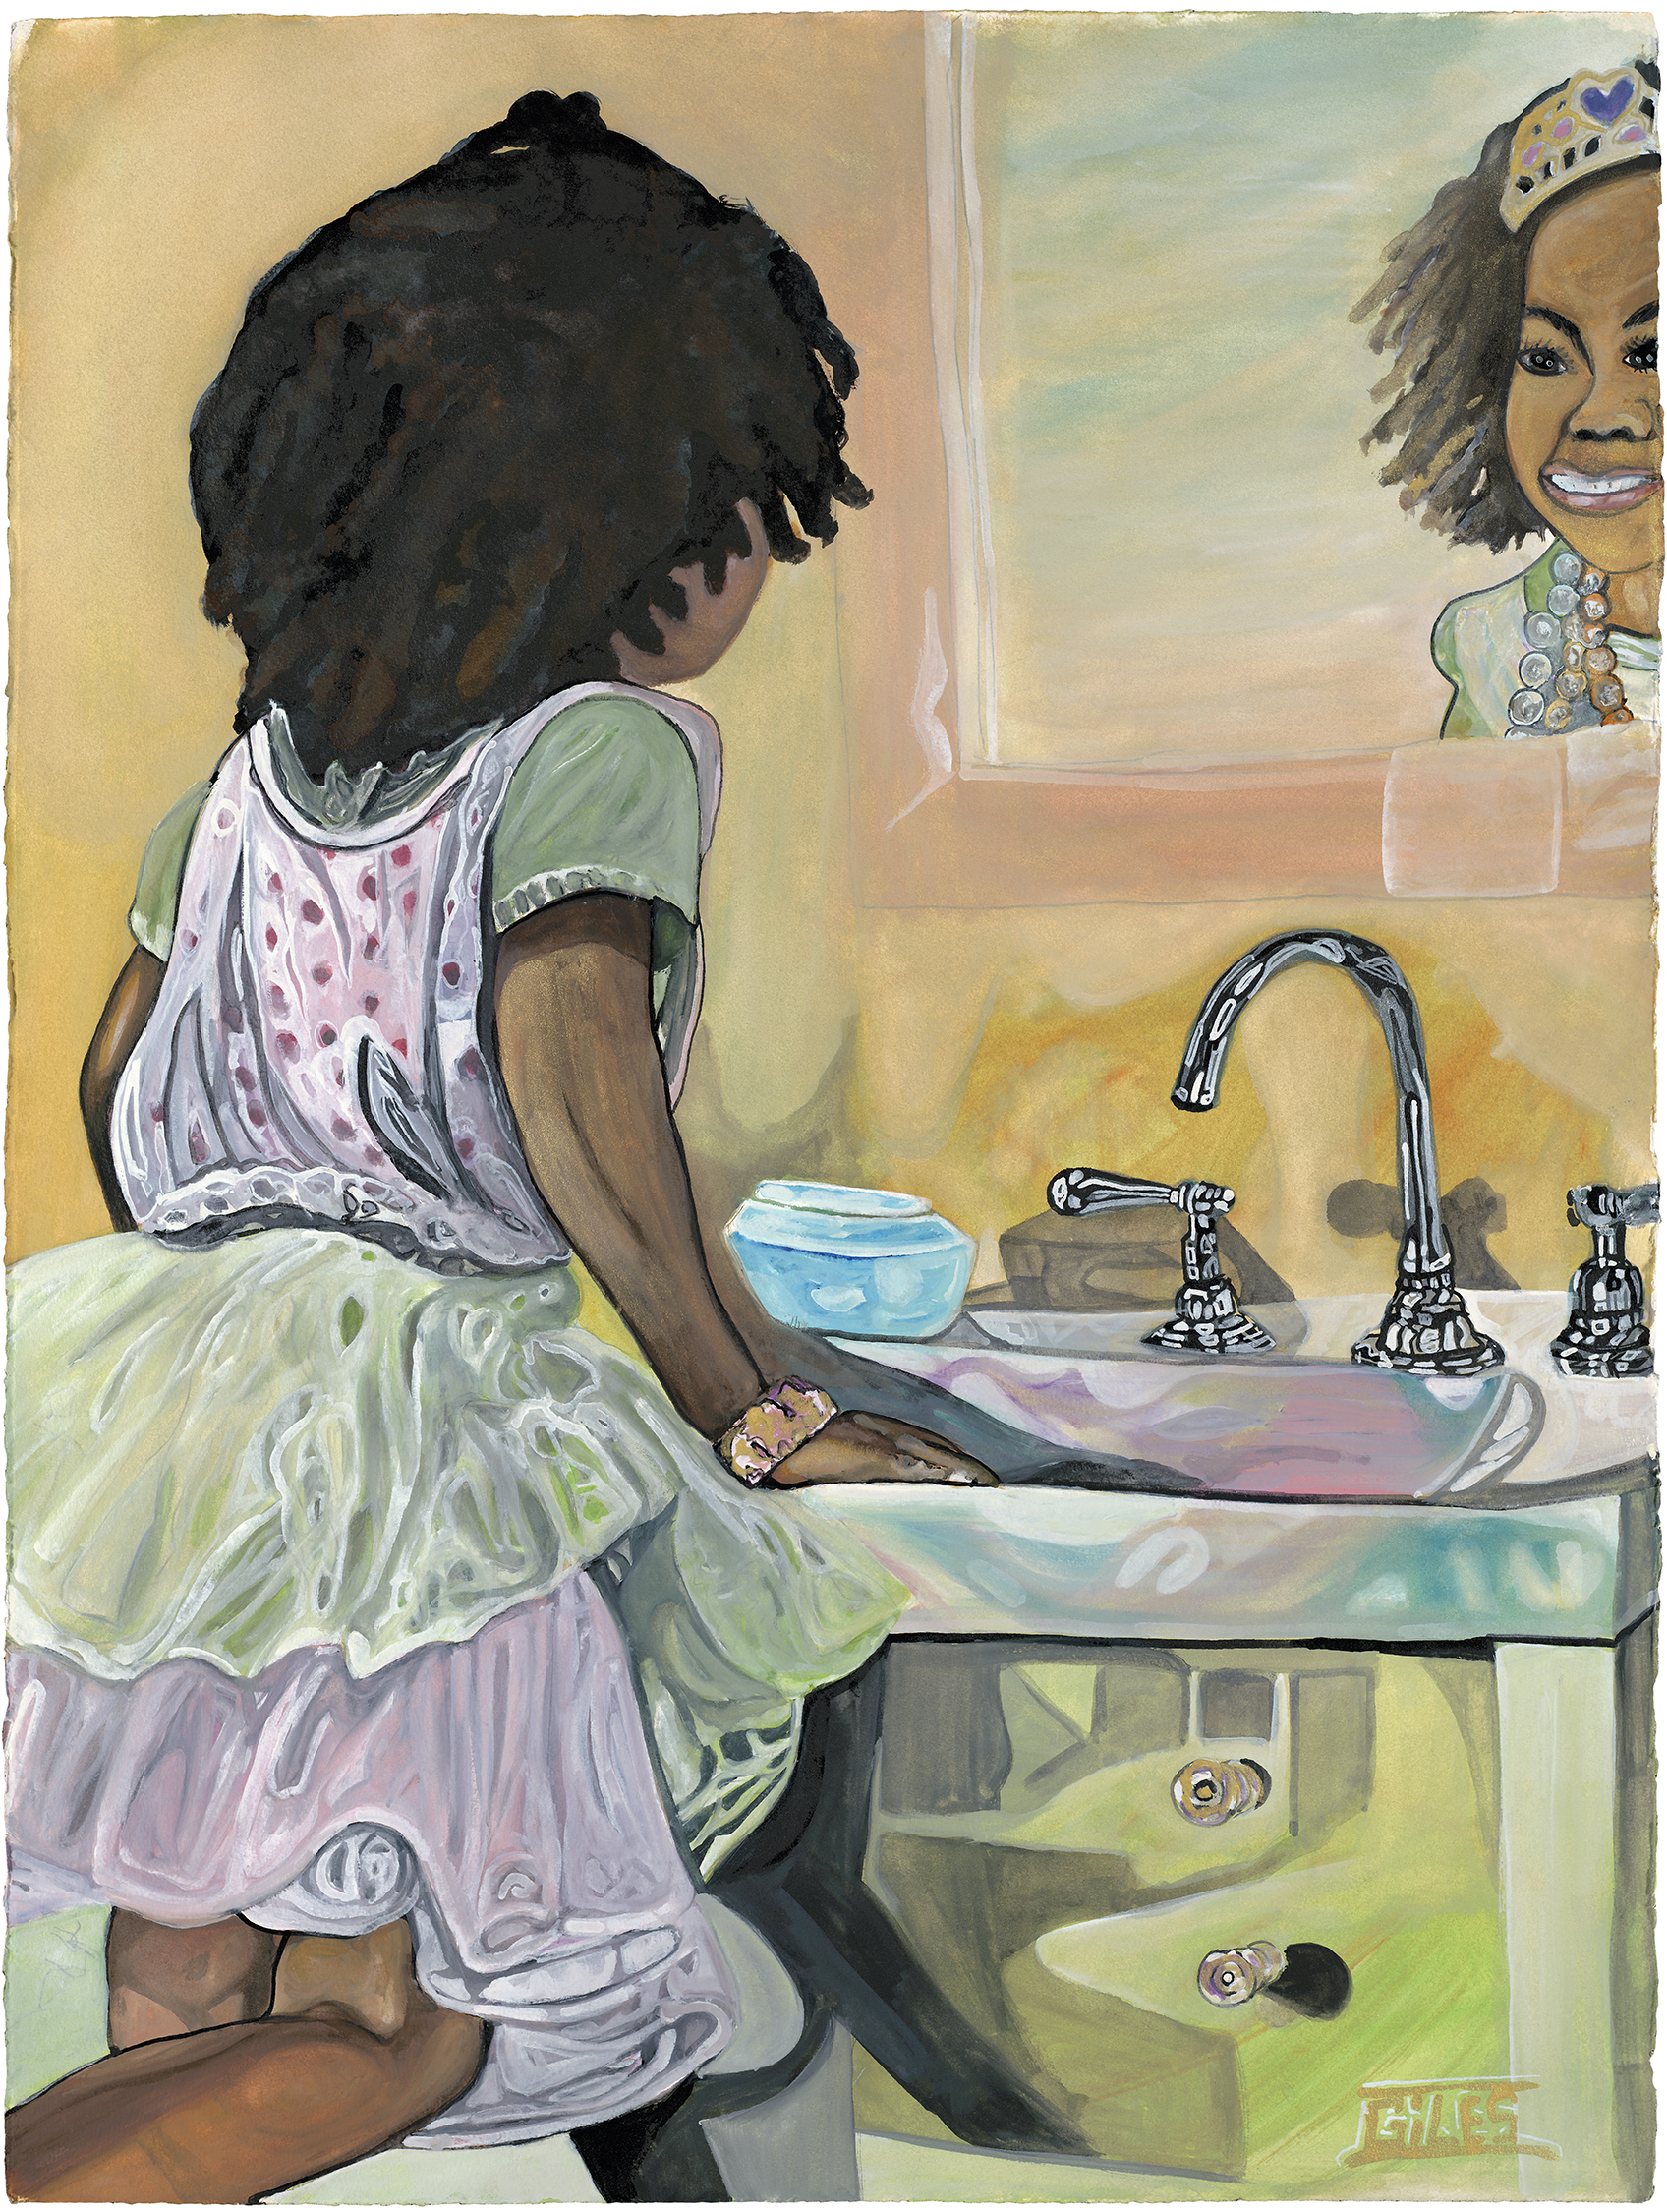 Artwork of a young girl looking in the mirror